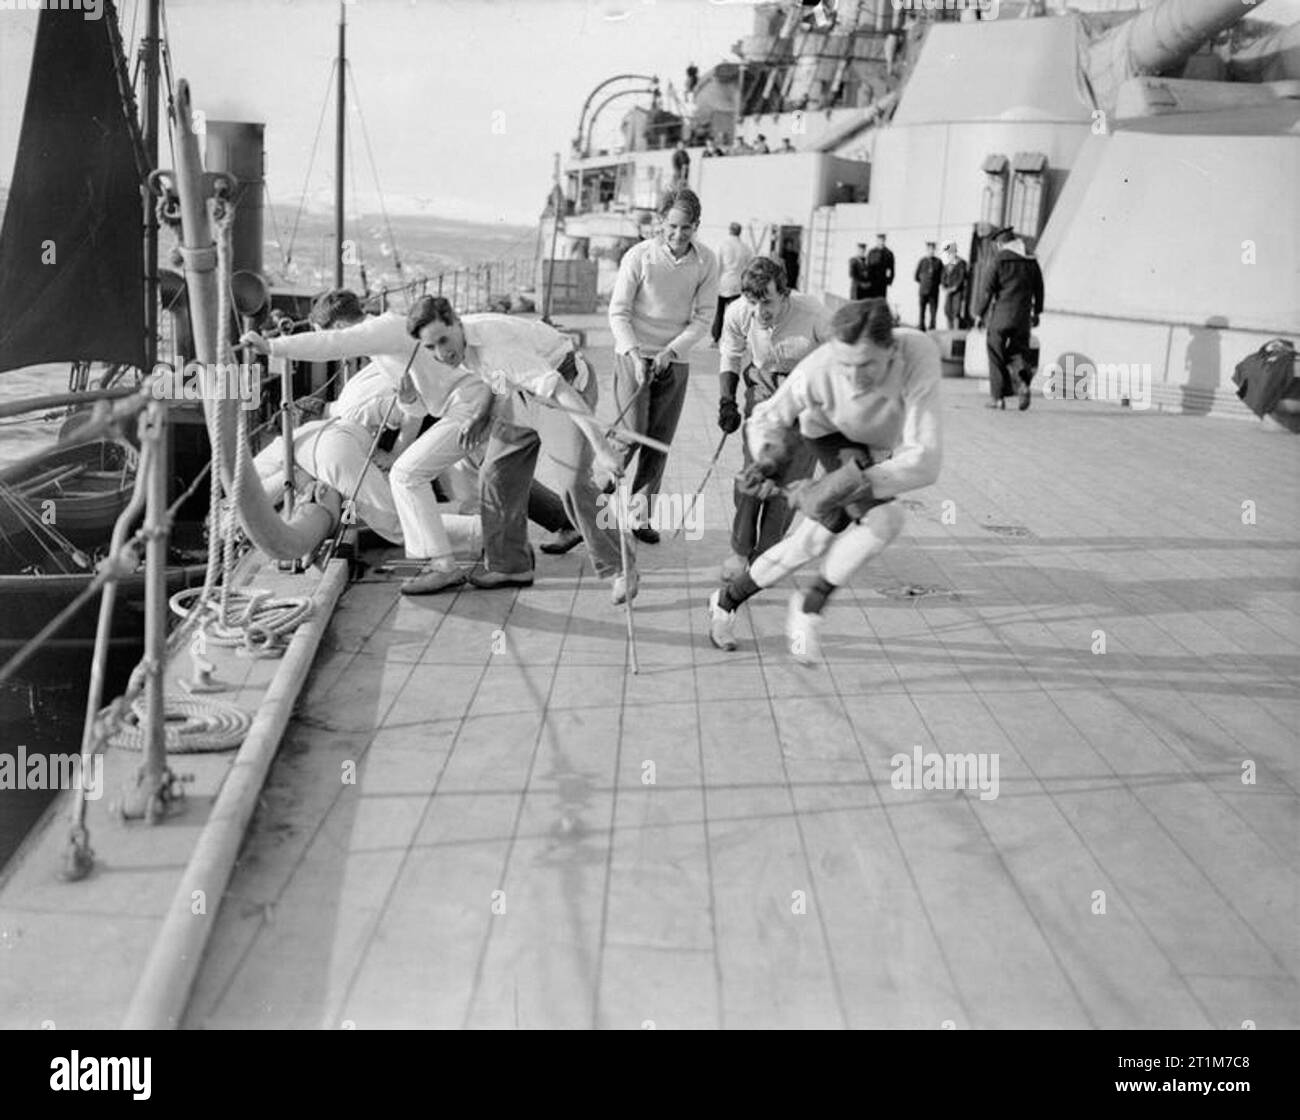 Official First World War Photographers Naval Official: Relaxation on board ship; officers playing hockey on the quarter deck of a battleship. Stock Photo